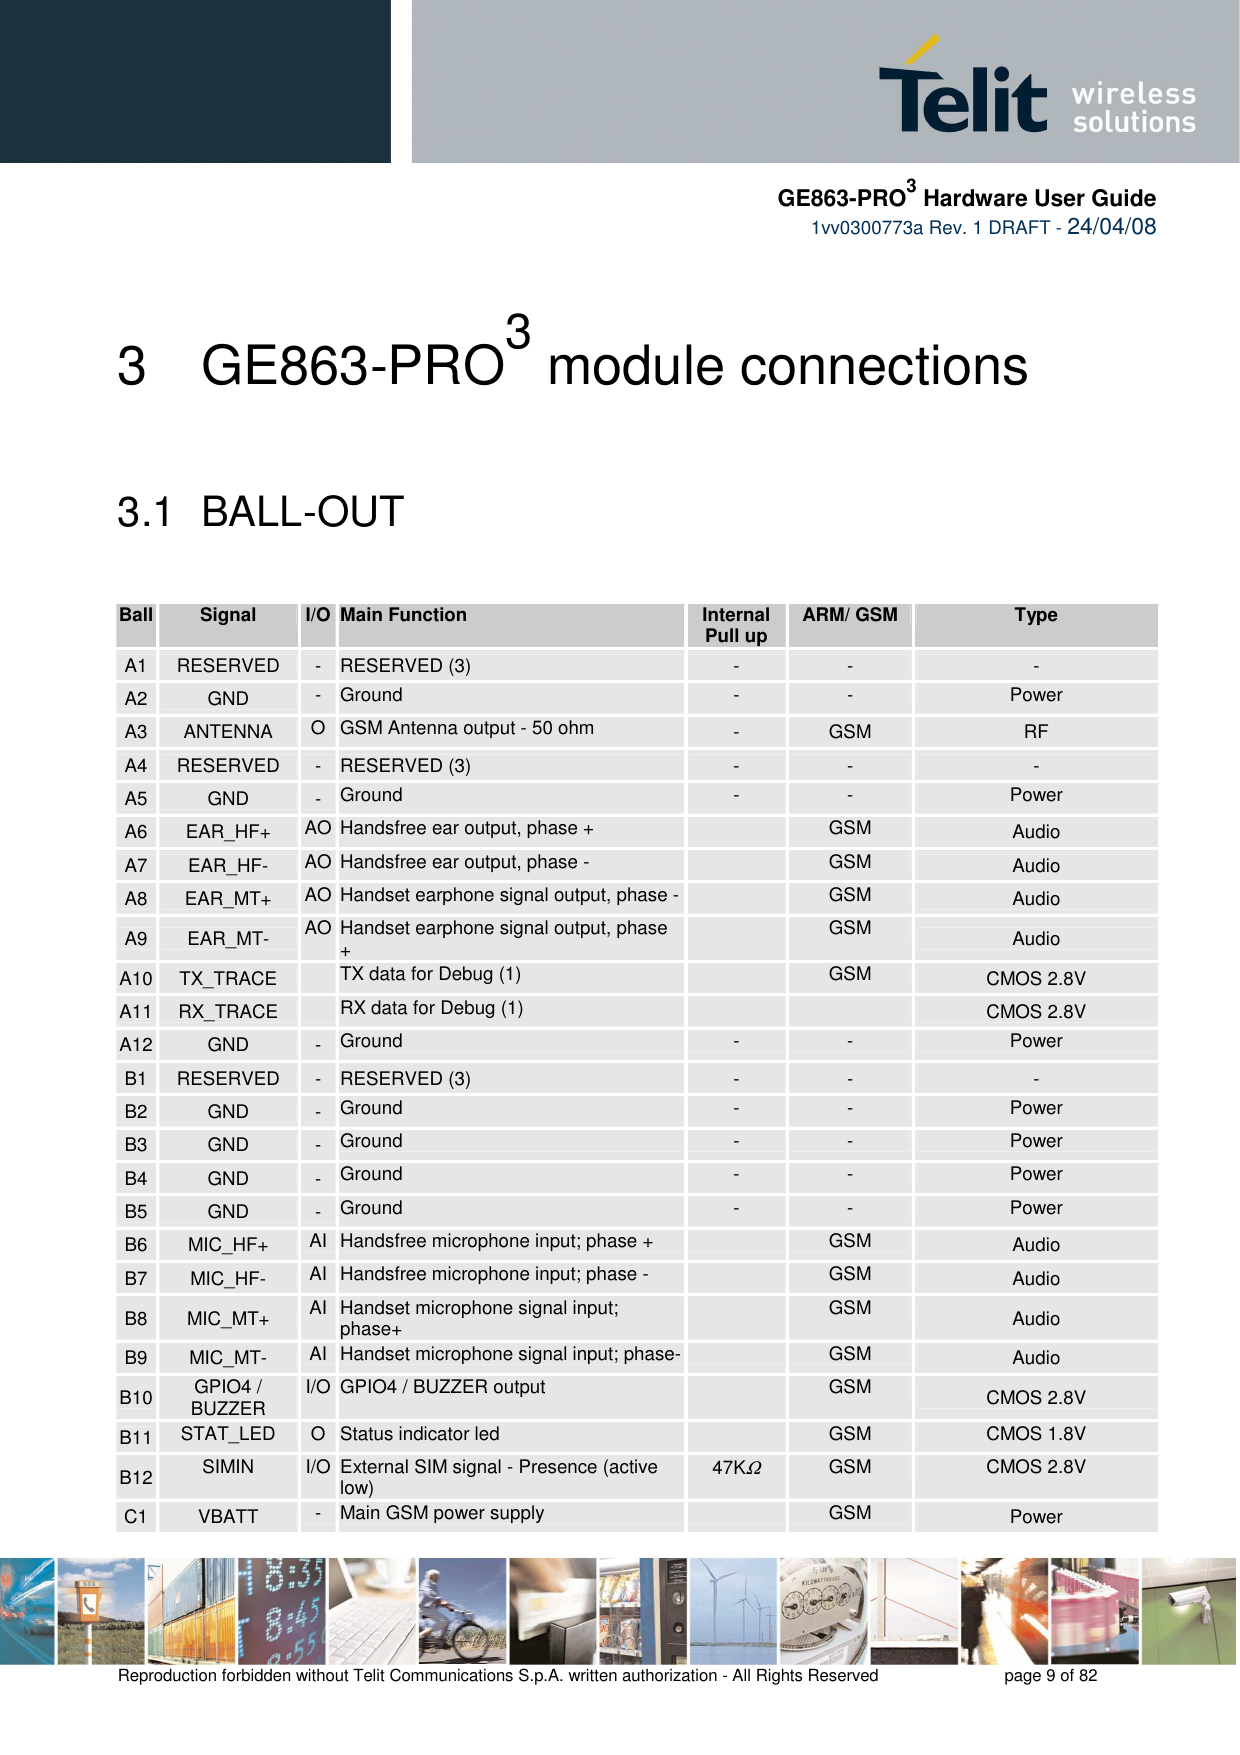     GE863-PRO3 Hardware User Guide  1vv0300773a Rev. 1 DRAFT - 24/04/08    Reproduction forbidden without Telit Communications S.p.A. written authorization - All Rights Reserved    page 9 of 82  3  GE863-PRO3 module connections  3.1  BALL-OUT   Ball Signal  I/O Main Function  Internal Pull up  ARM/ GSM  Type A1 RESERVED  -  RESERVED (3)  -  -  - A2 GND  -  Ground  -  -  Power  A3 ANTENNA  O GSM Antenna output - 50 ohm  -  GSM  RF A4 RESERVED  -  RESERVED (3)  -  -  - A5 GND  -  Ground  -  -  Power  A6 EAR_HF+  AO Handsfree ear output, phase +    GSM  Audio A7 EAR_HF-  AO Handsfree ear output, phase -    GSM  Audio A8 EAR_MT+  AO Handset earphone signal output, phase -   GSM  Audio A9 EAR_MT-  AO Handset earphone signal output, phase +    GSM  Audio A10 TX_TRACE    TX data for Debug (1)    GSM  CMOS 2.8V A11 RX_TRACE    RX data for Debug (1)      CMOS 2.8V A12 GND  -  Ground  -  -  Power  B1 RESERVED  -  RESERVED (3)  -  -  - B2 GND  -  Ground  -  -  Power  B3 GND  -  Ground  -  -  Power  B4 GND  -  Ground  -  -  Power  B5 GND  -  Ground  -  -  Power  B6 MIC_HF+  AI Handsfree microphone input; phase +    GSM  Audio B7 MIC_HF-  AI Handsfree microphone input; phase -    GSM  Audio B8 MIC_MT+  AI Handset microphone signal input; phase+    GSM  Audio B9 MIC_MT-  AI Handset microphone signal input; phase-   GSM  Audio B10 GPIO4 / BUZZER  I/O GPIO4 / BUZZER output     GSM  CMOS 2.8V B11 STAT_LED  O Status indicator led    GSM  CMOS 1.8V B12 SIMIN  I/O External SIM signal - Presence (active low)  47KΩ GSM  CMOS 2.8V C1 VBATT  -  Main GSM power supply    GSM  Power 